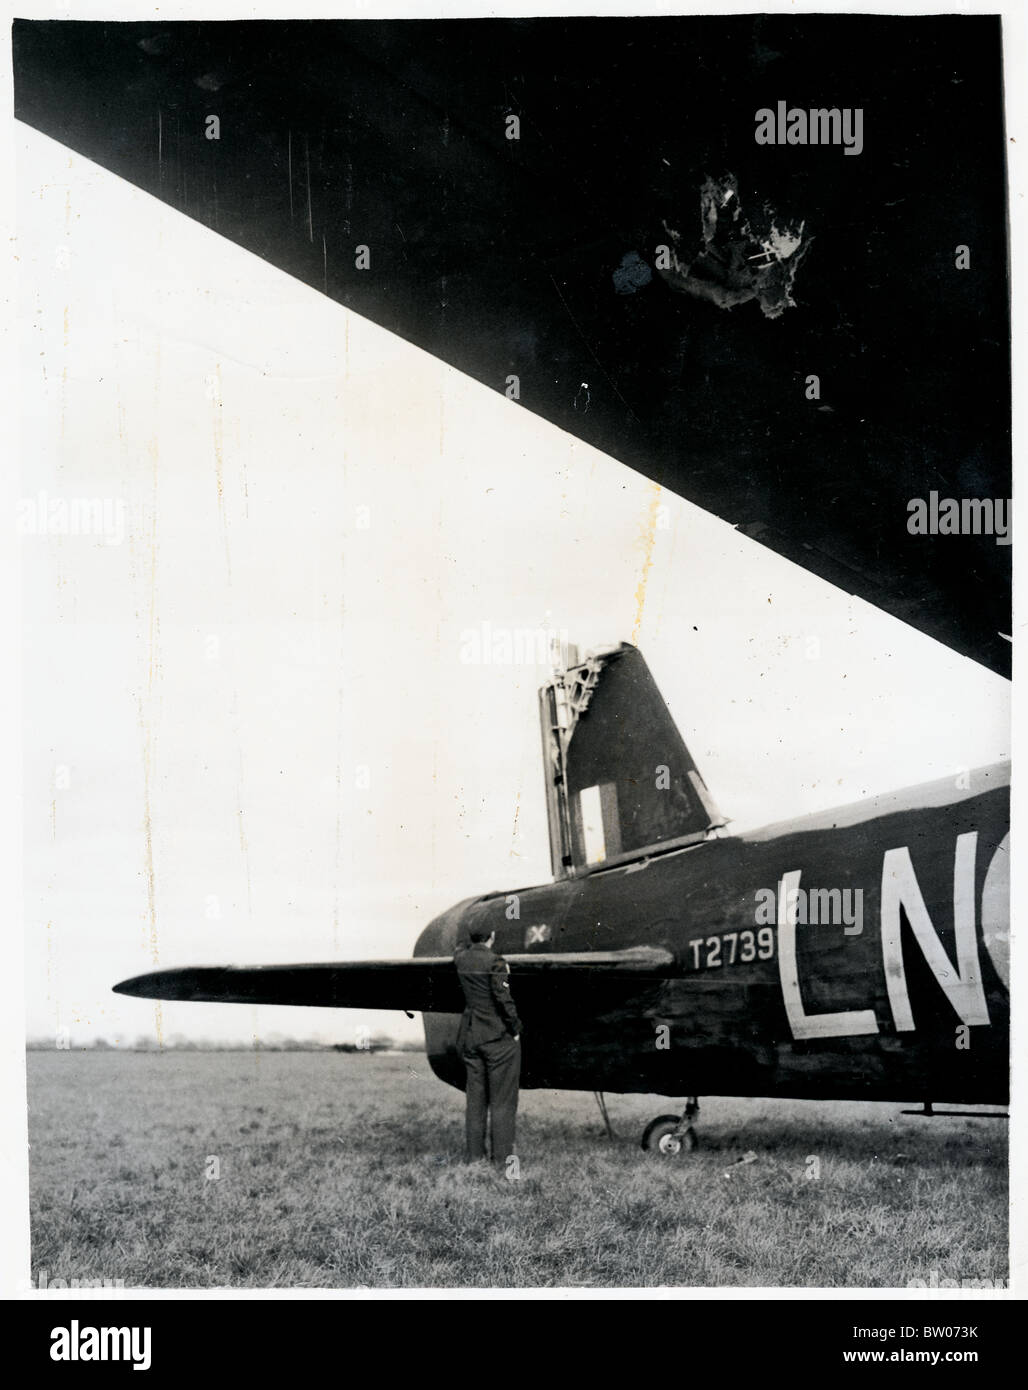 Wellington Bomber with Tail show away after bombing raid Stock Photo